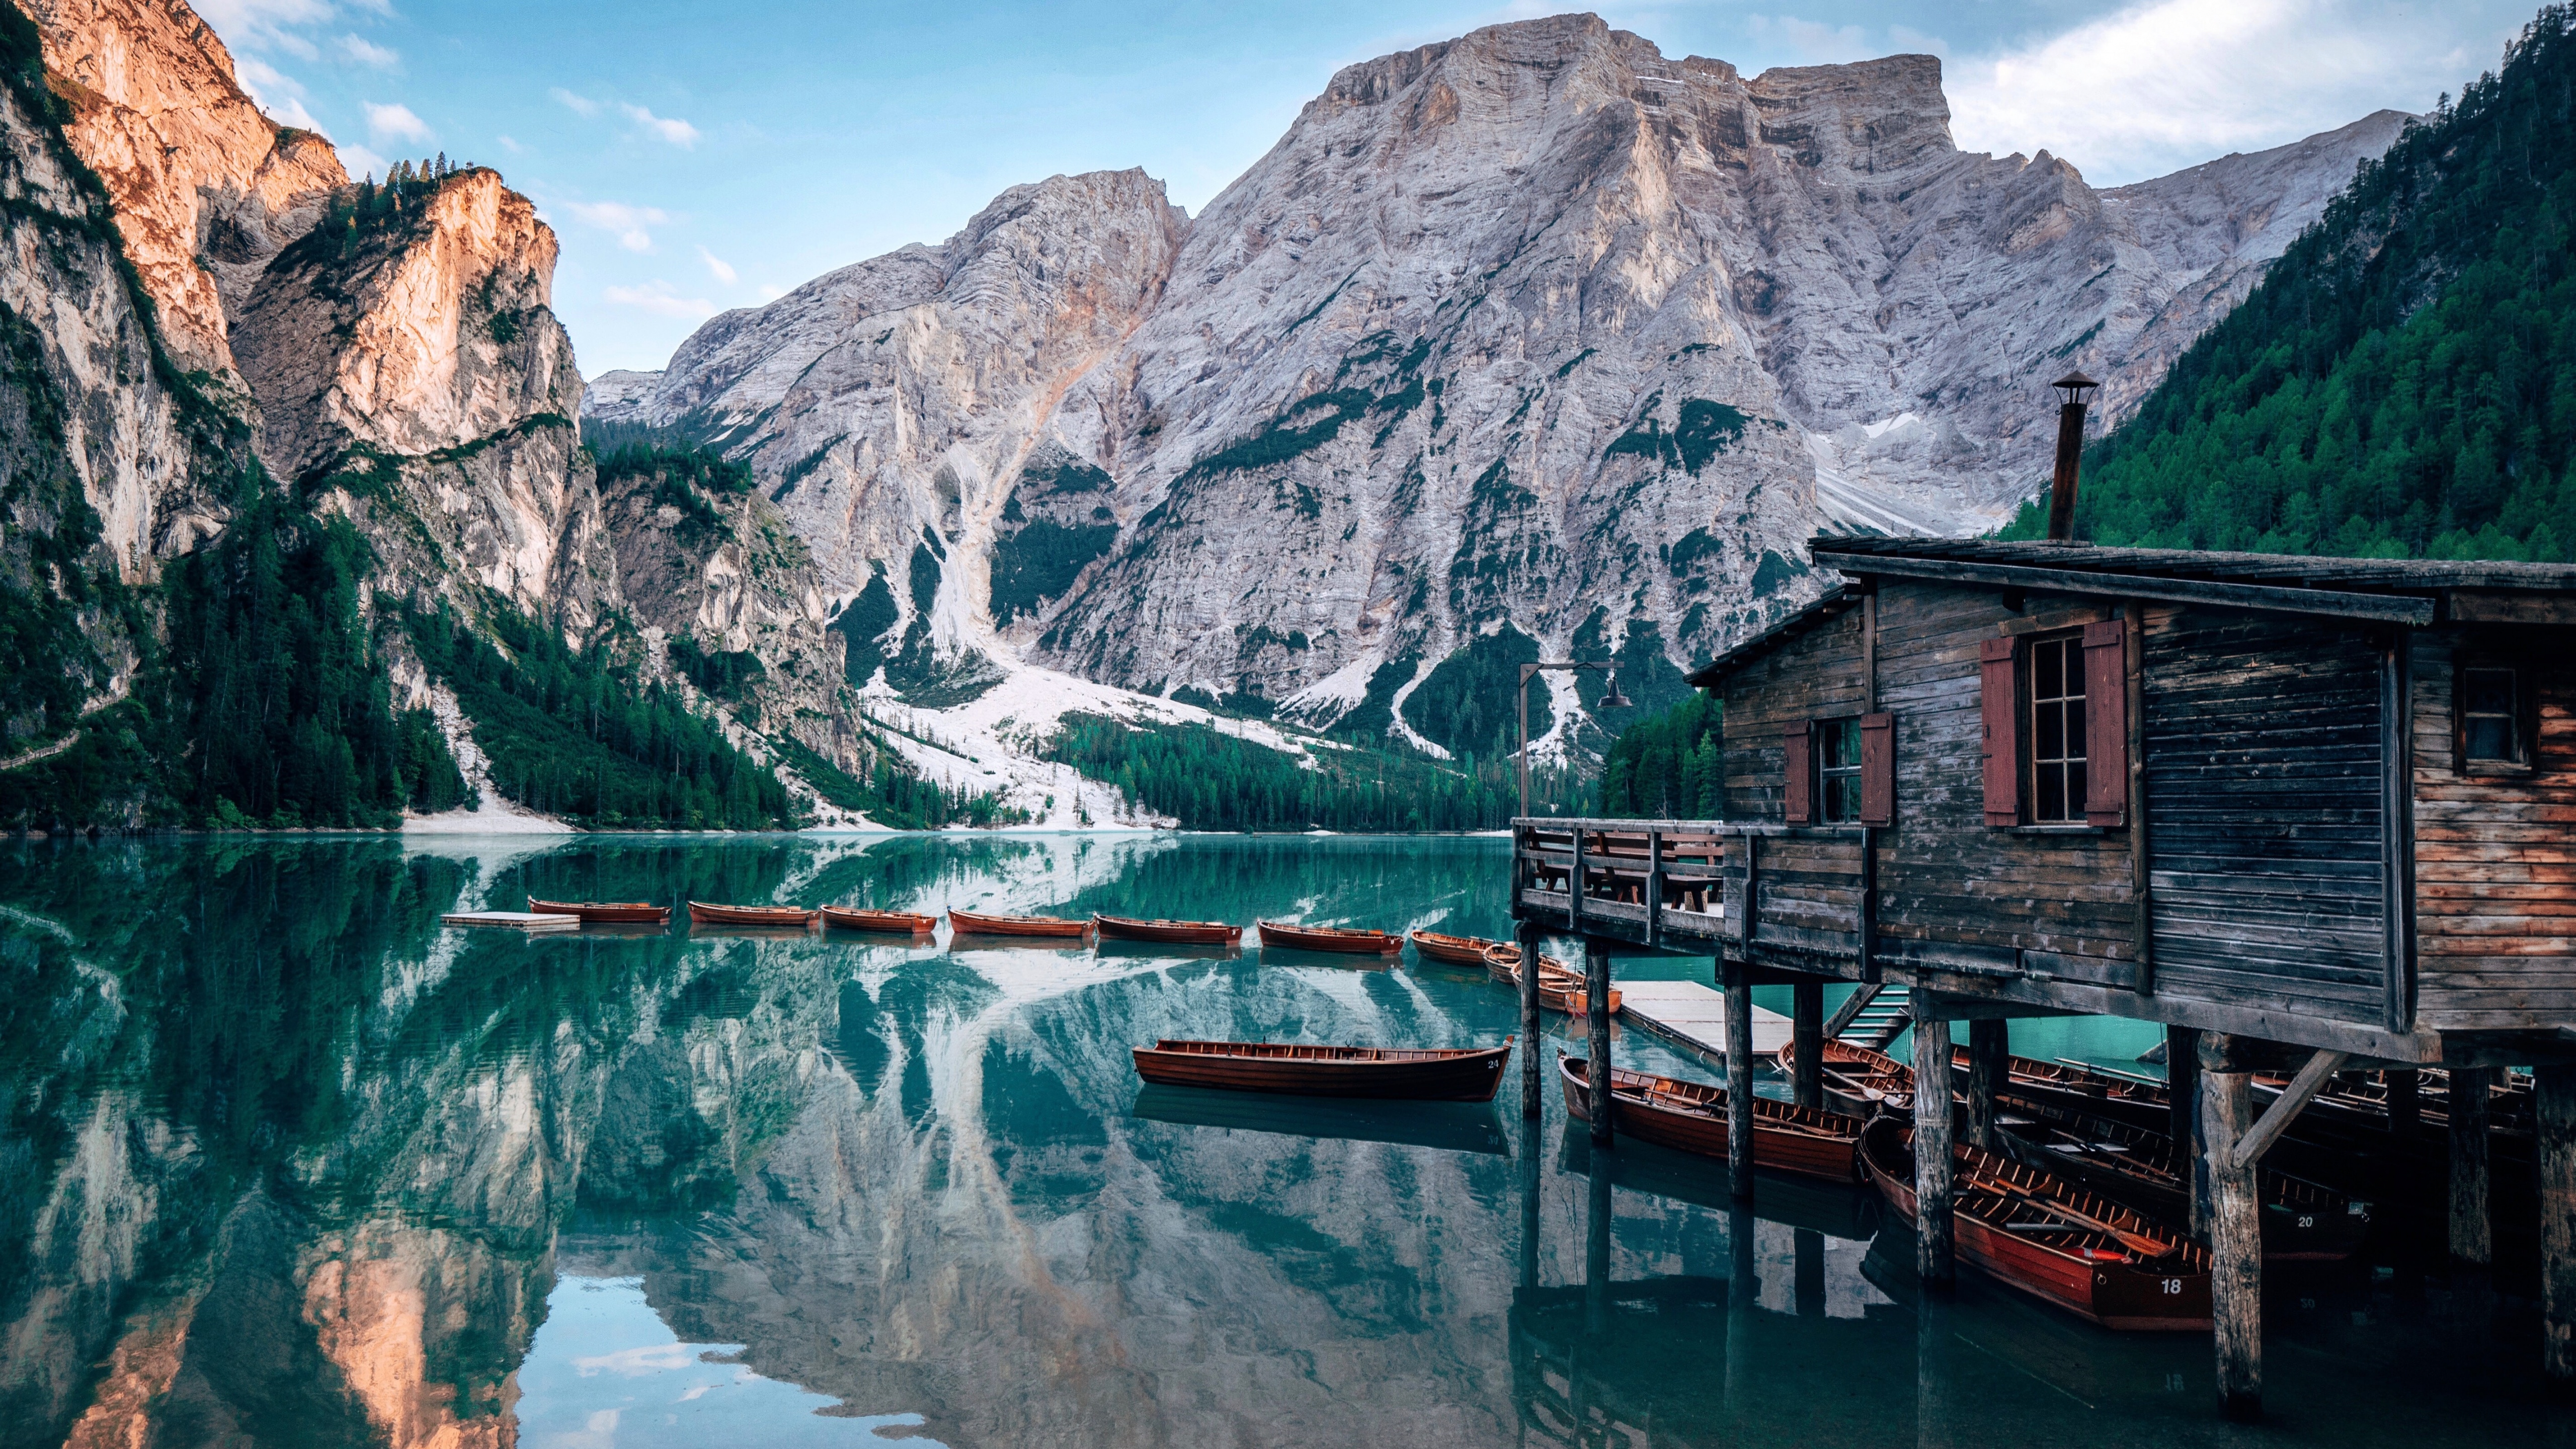 Lake Braies Wallpaper 4K, Italy, Wooden House, Boats, Mountains, Glacier, Nature